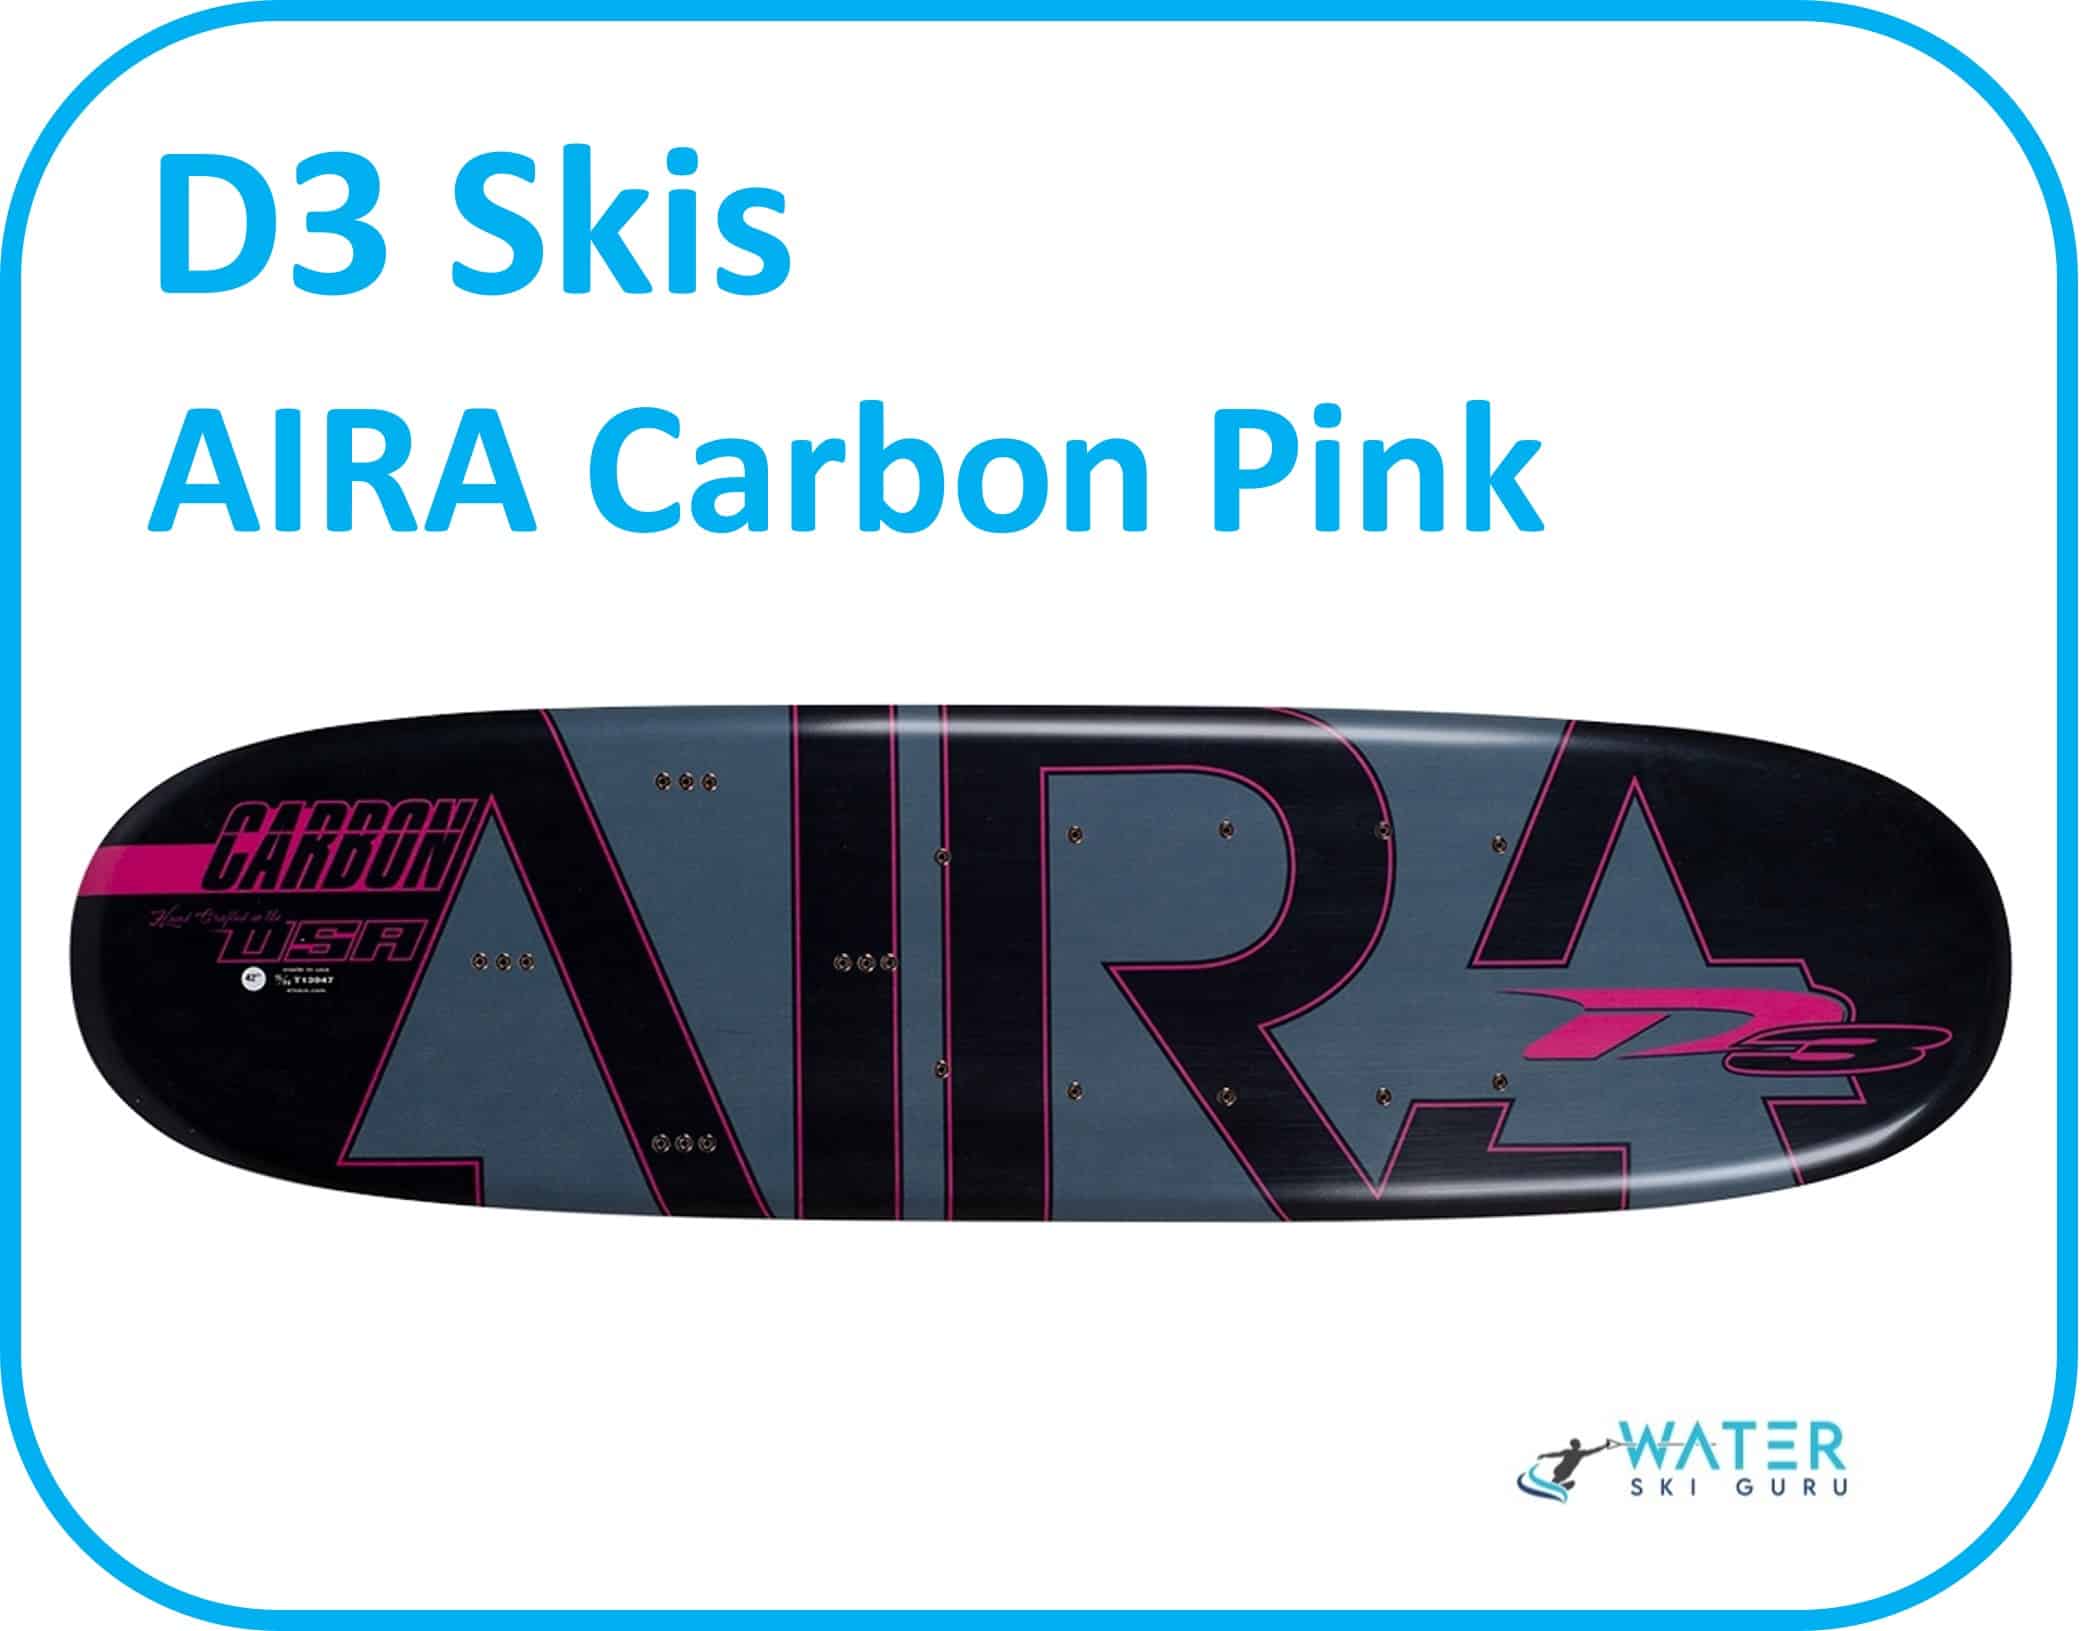 D3 Skis AIRA Carbon Pink